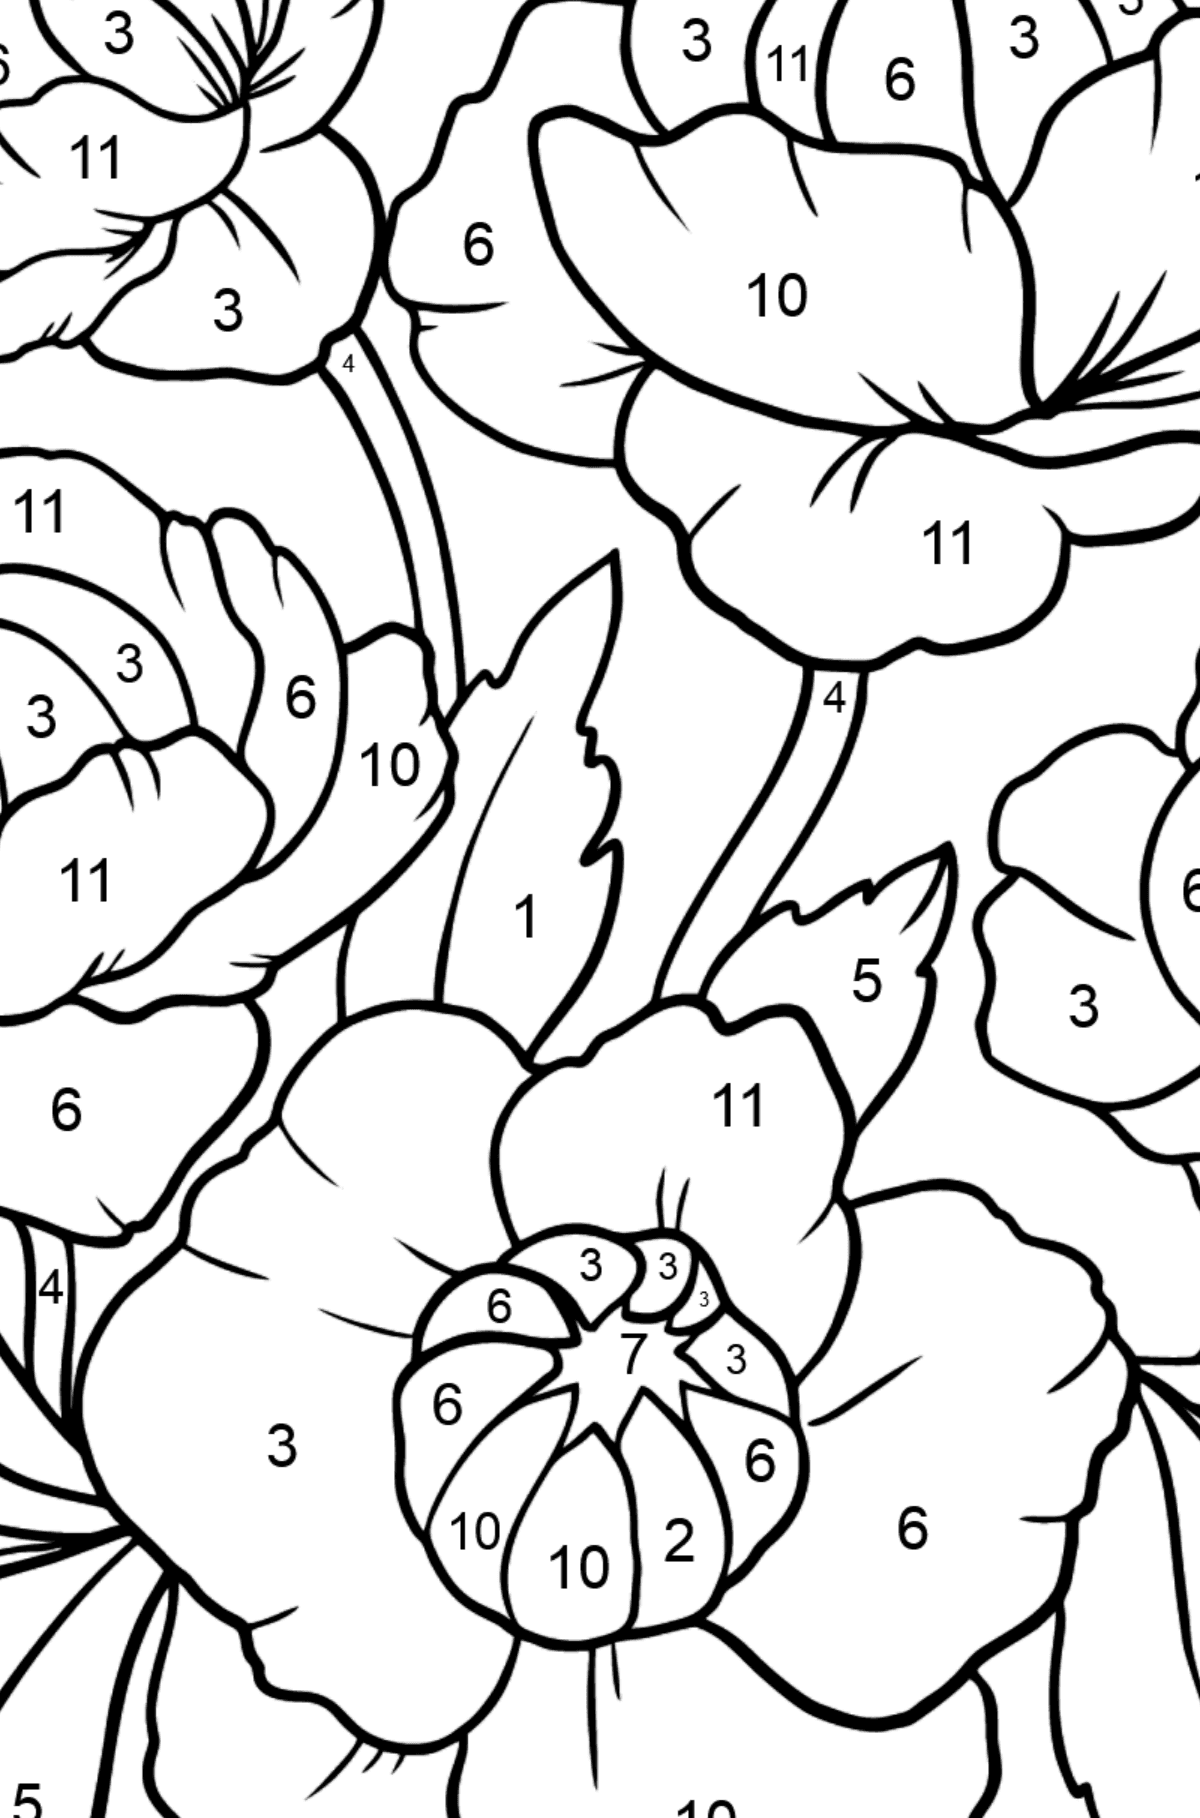 Red Globeflower Coloring Page - Coloring by Numbers for Kids